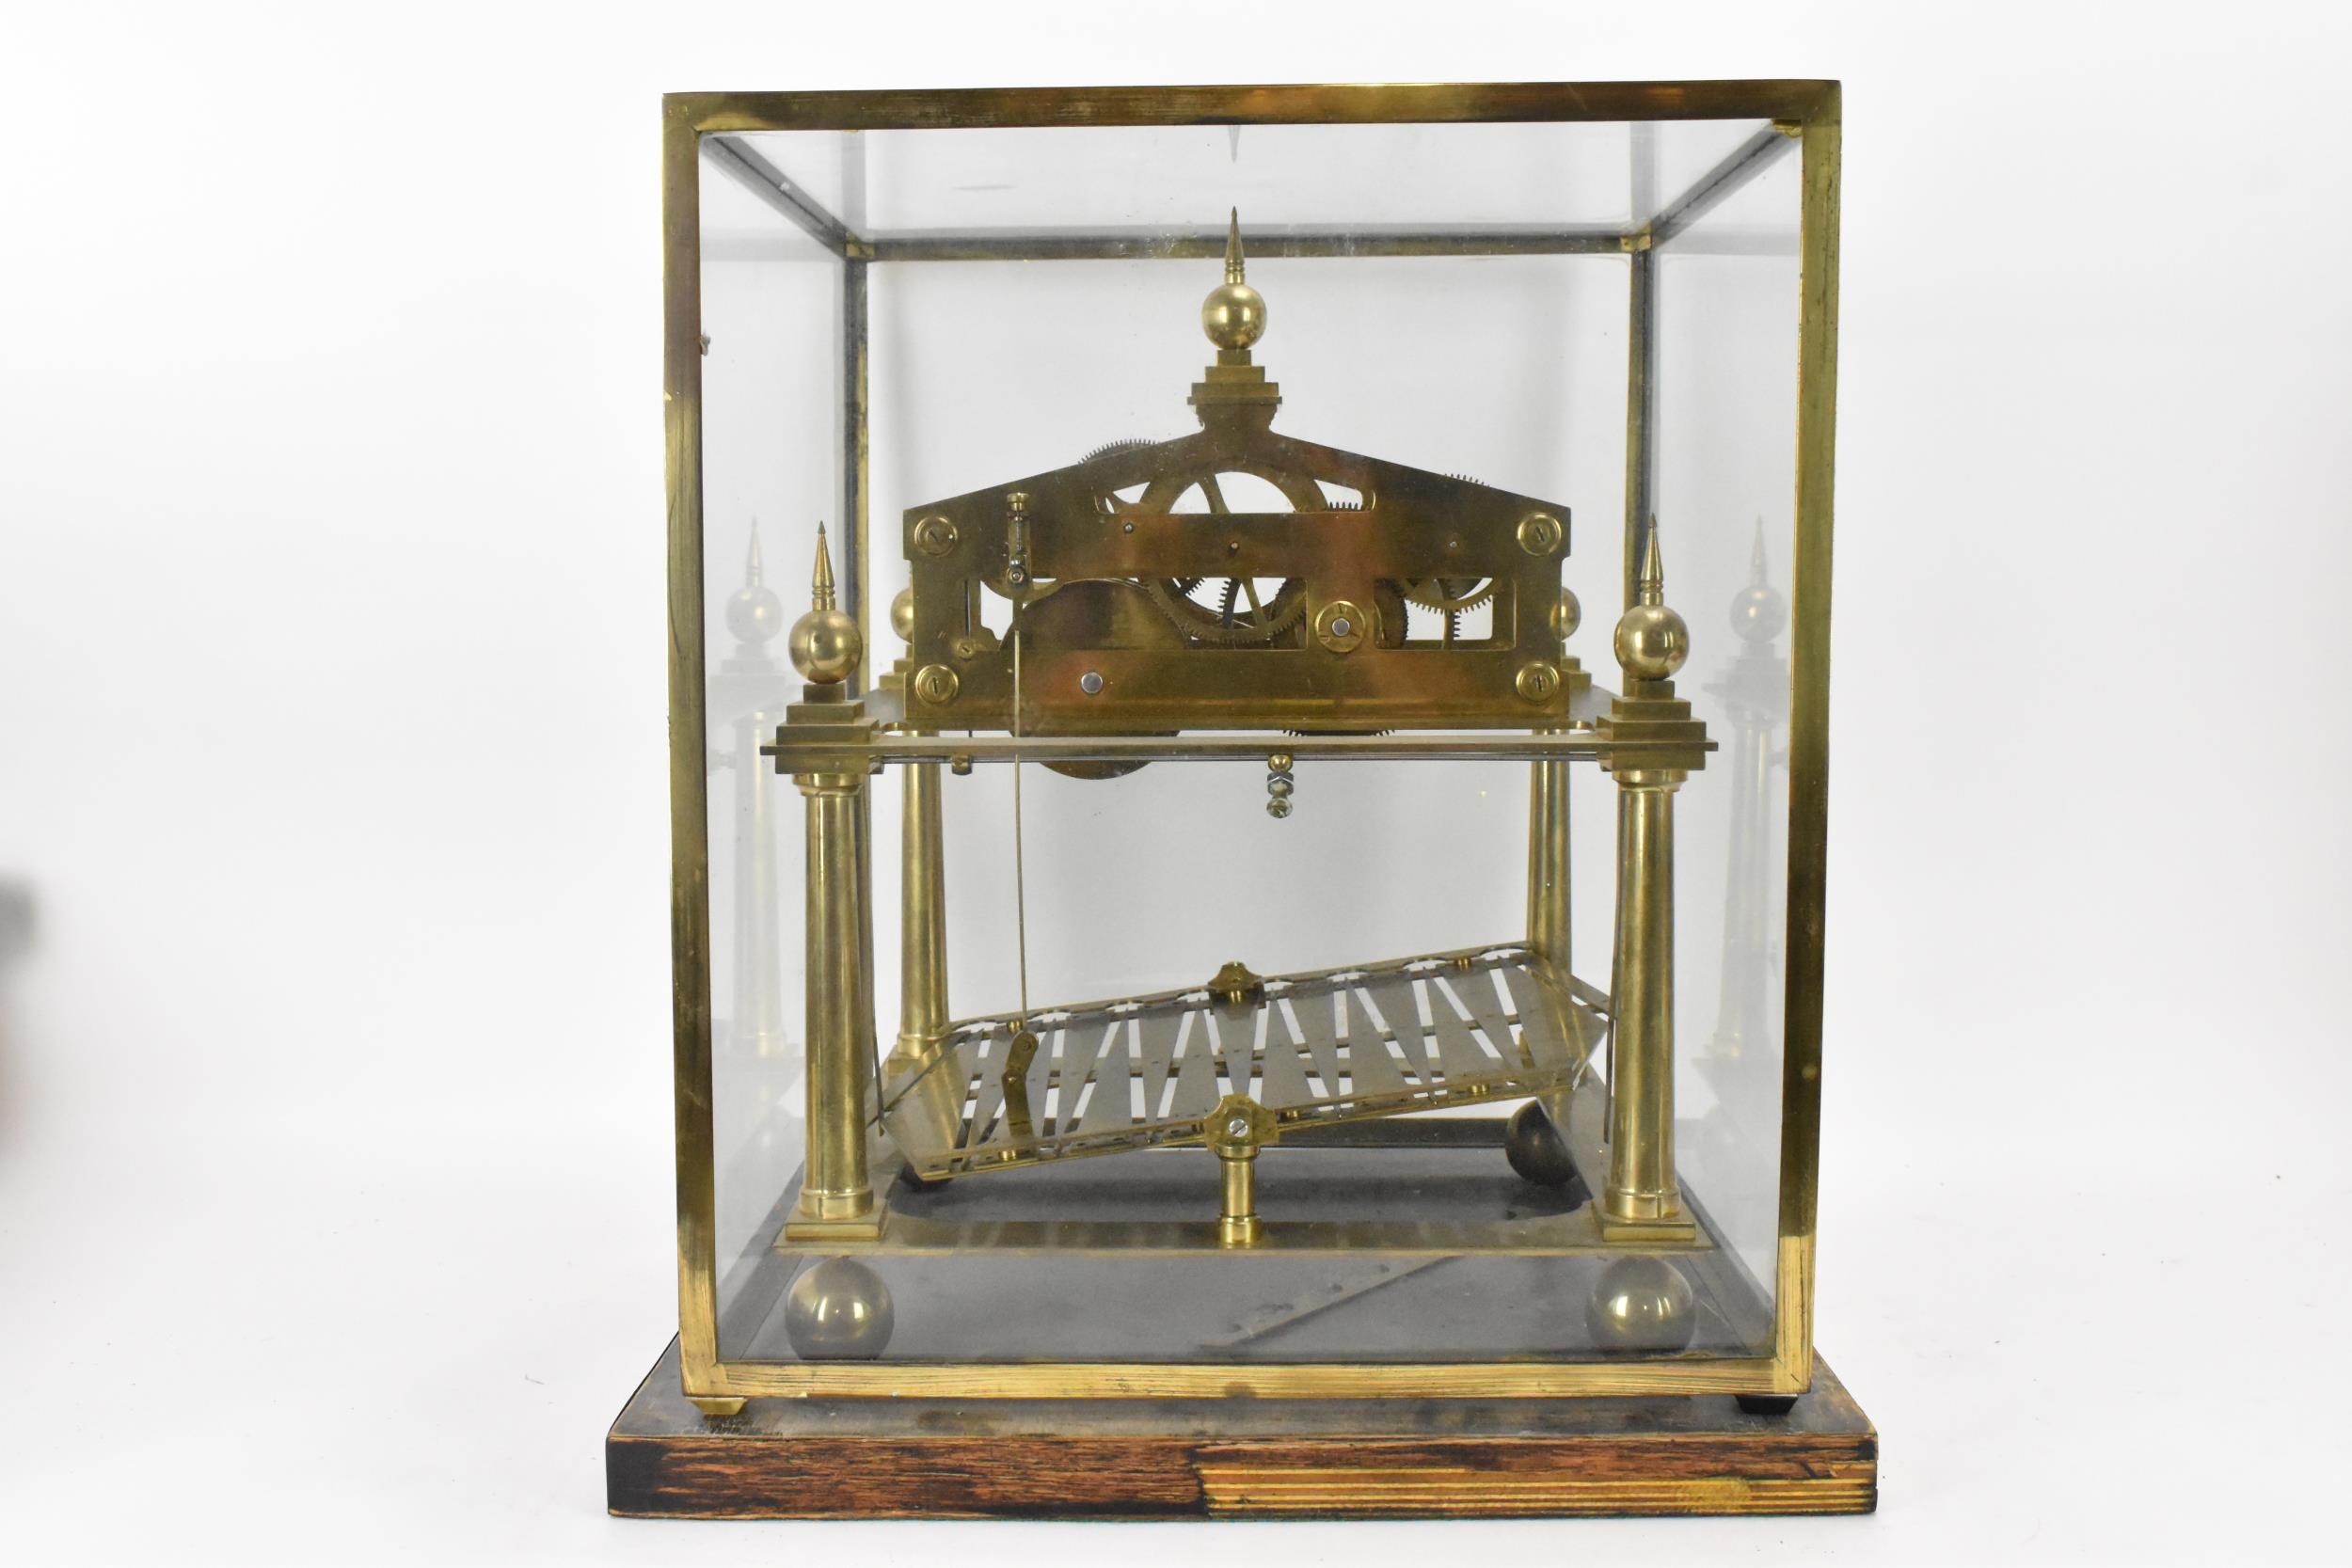 A 20th century Congreve clock, housed in glass display cabinet, having three silvered chapter rings, - Image 3 of 7